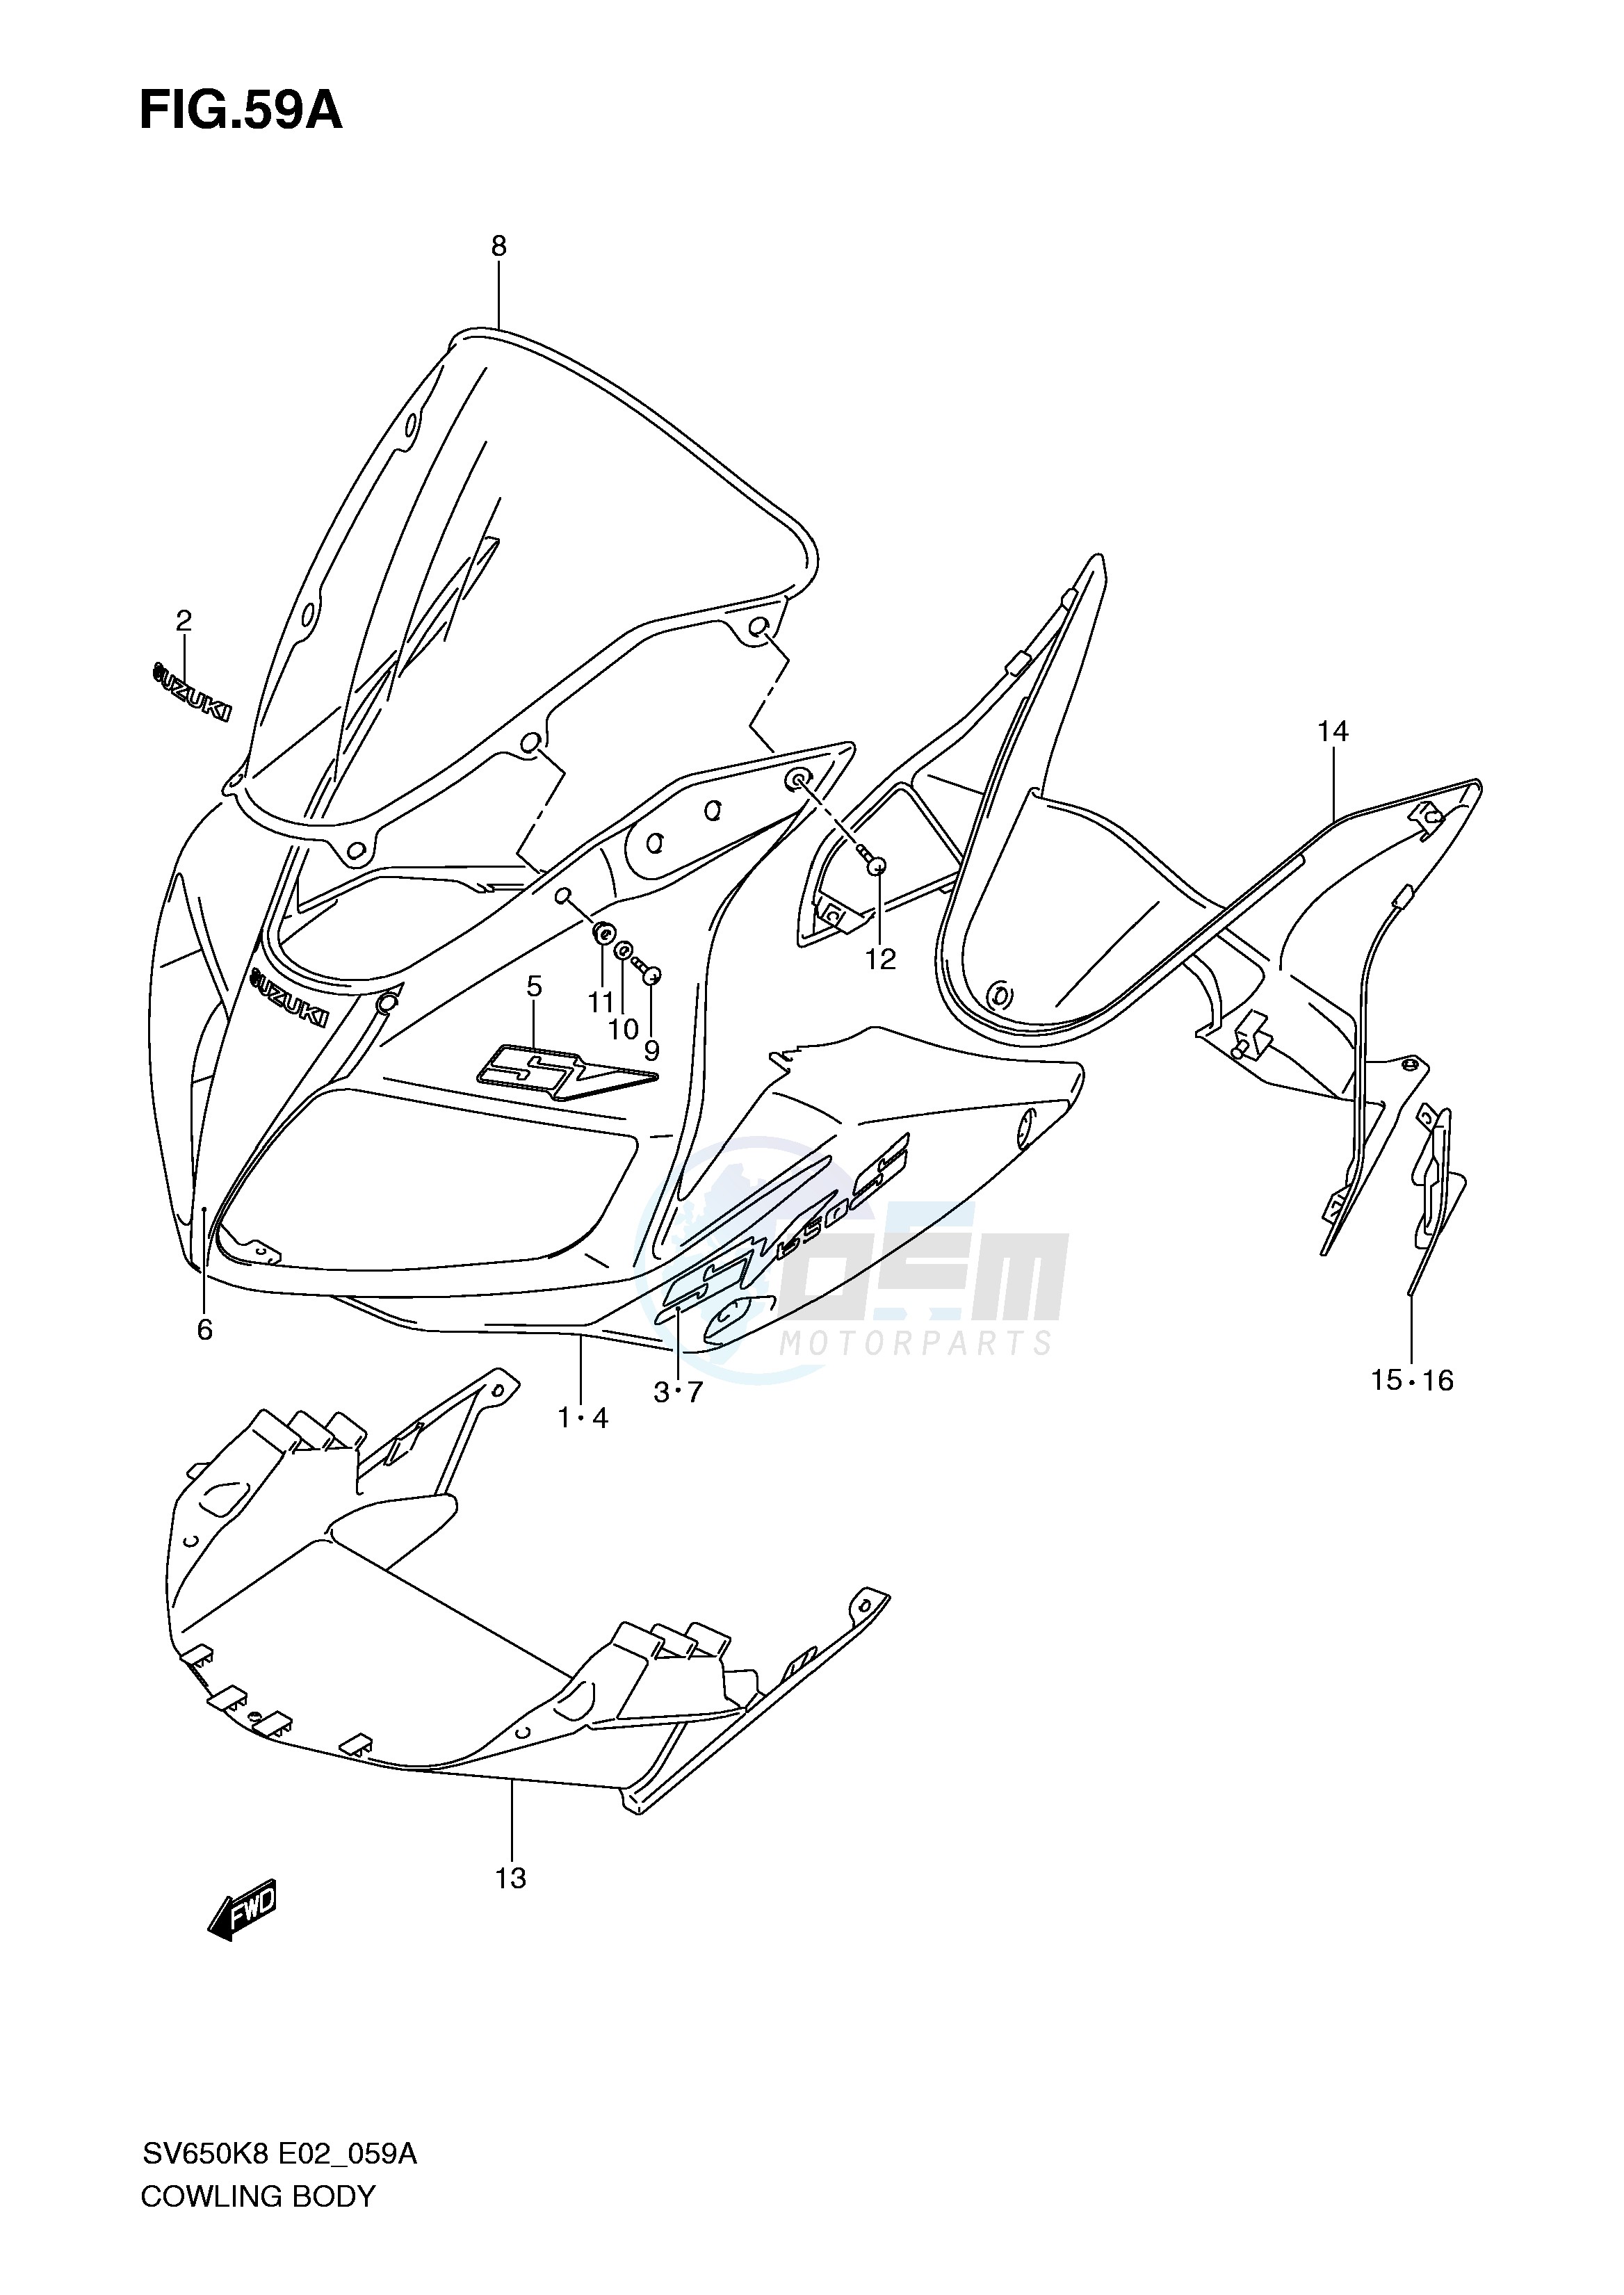 COWLING BODY (MODEL K9 WITH COWLING) blueprint